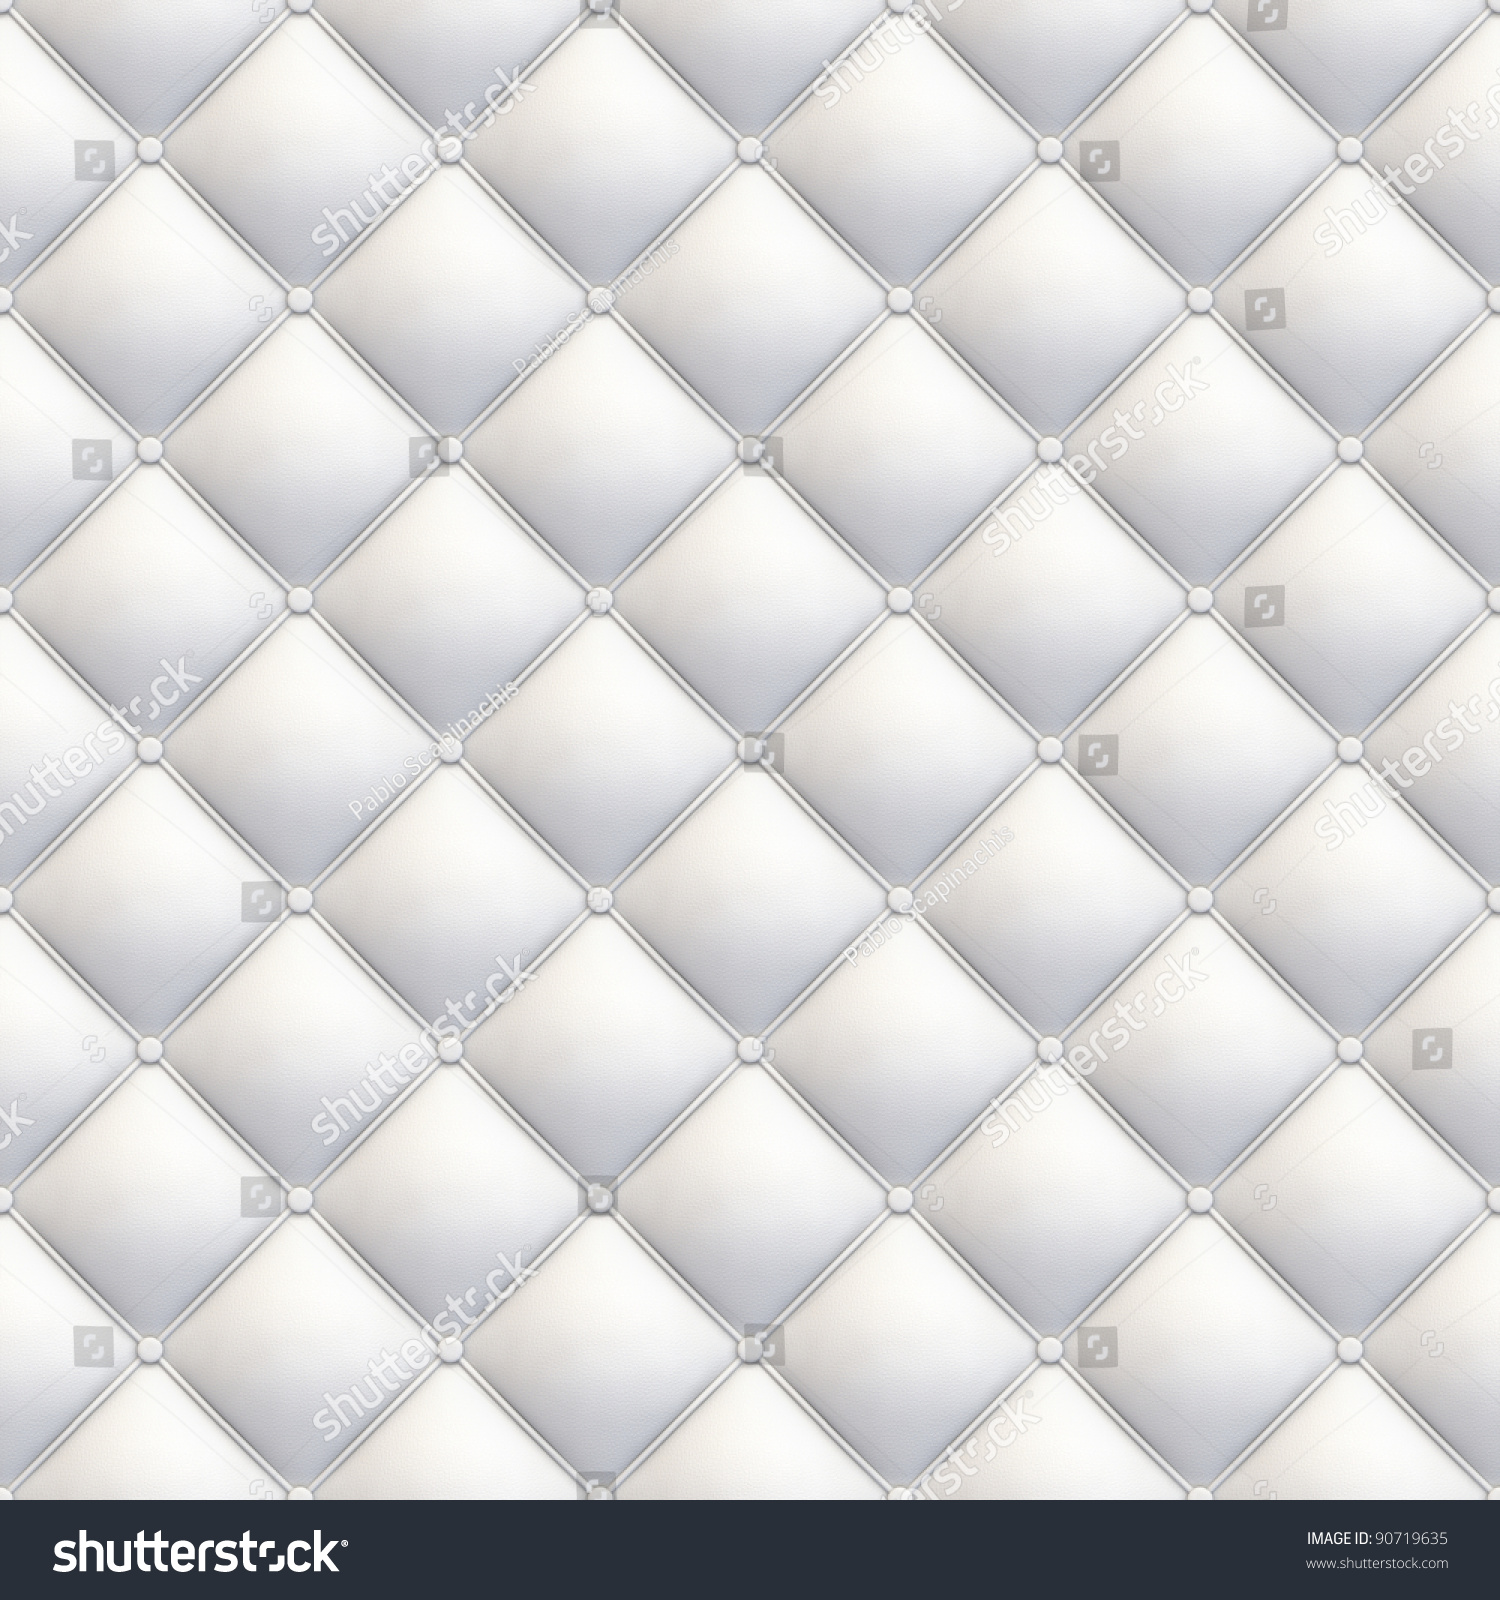 White Leather Upholstery Seamless Tile-Able Texture With Great Detail ...